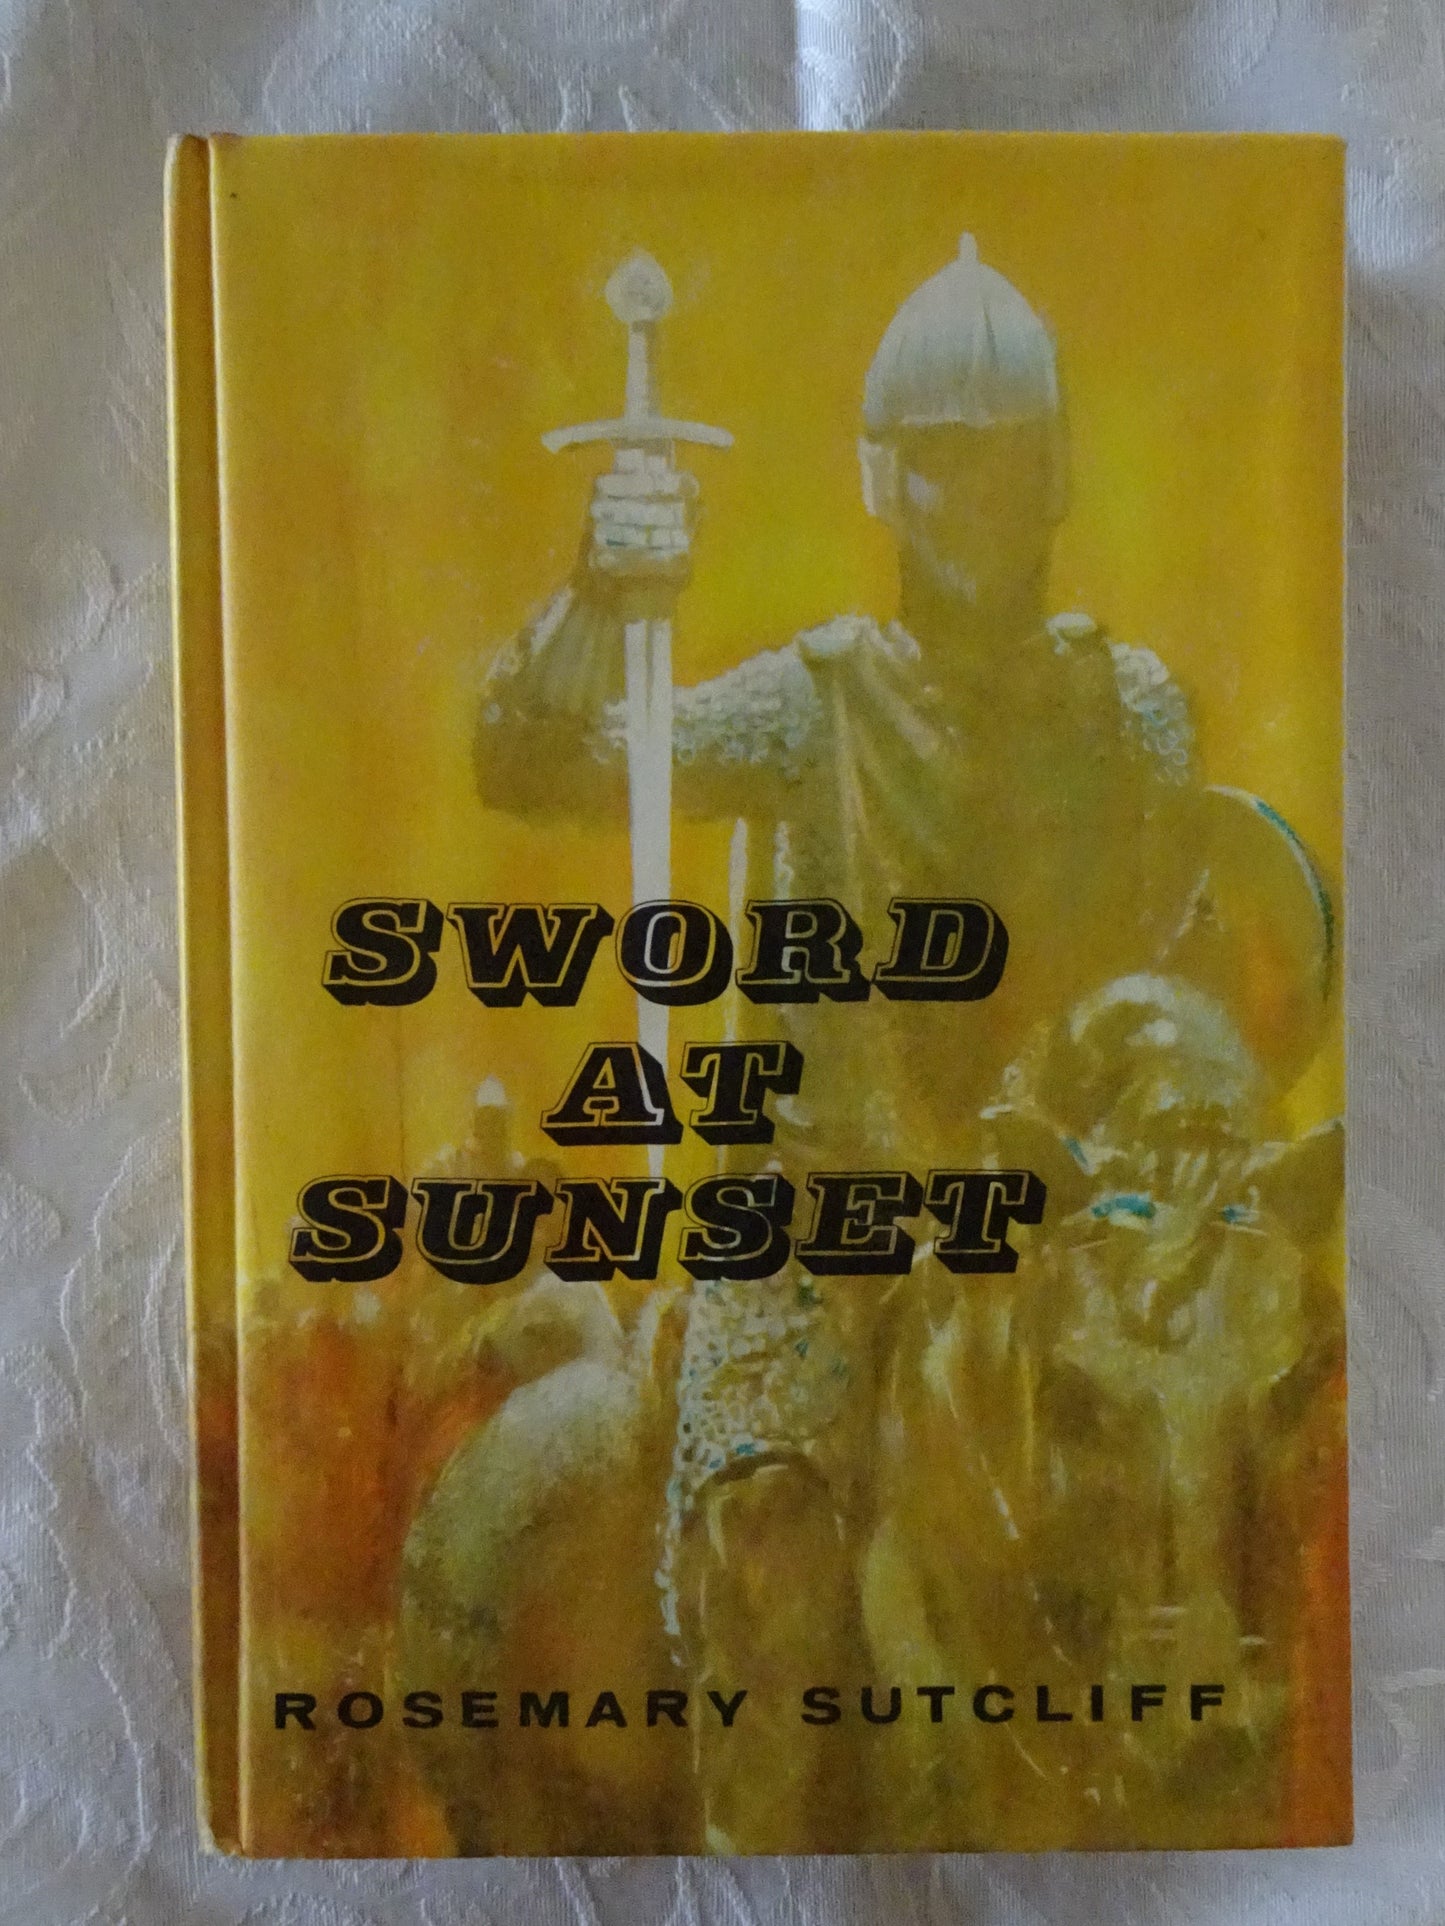 Sword At Sunset by Rosemary Sutcliff